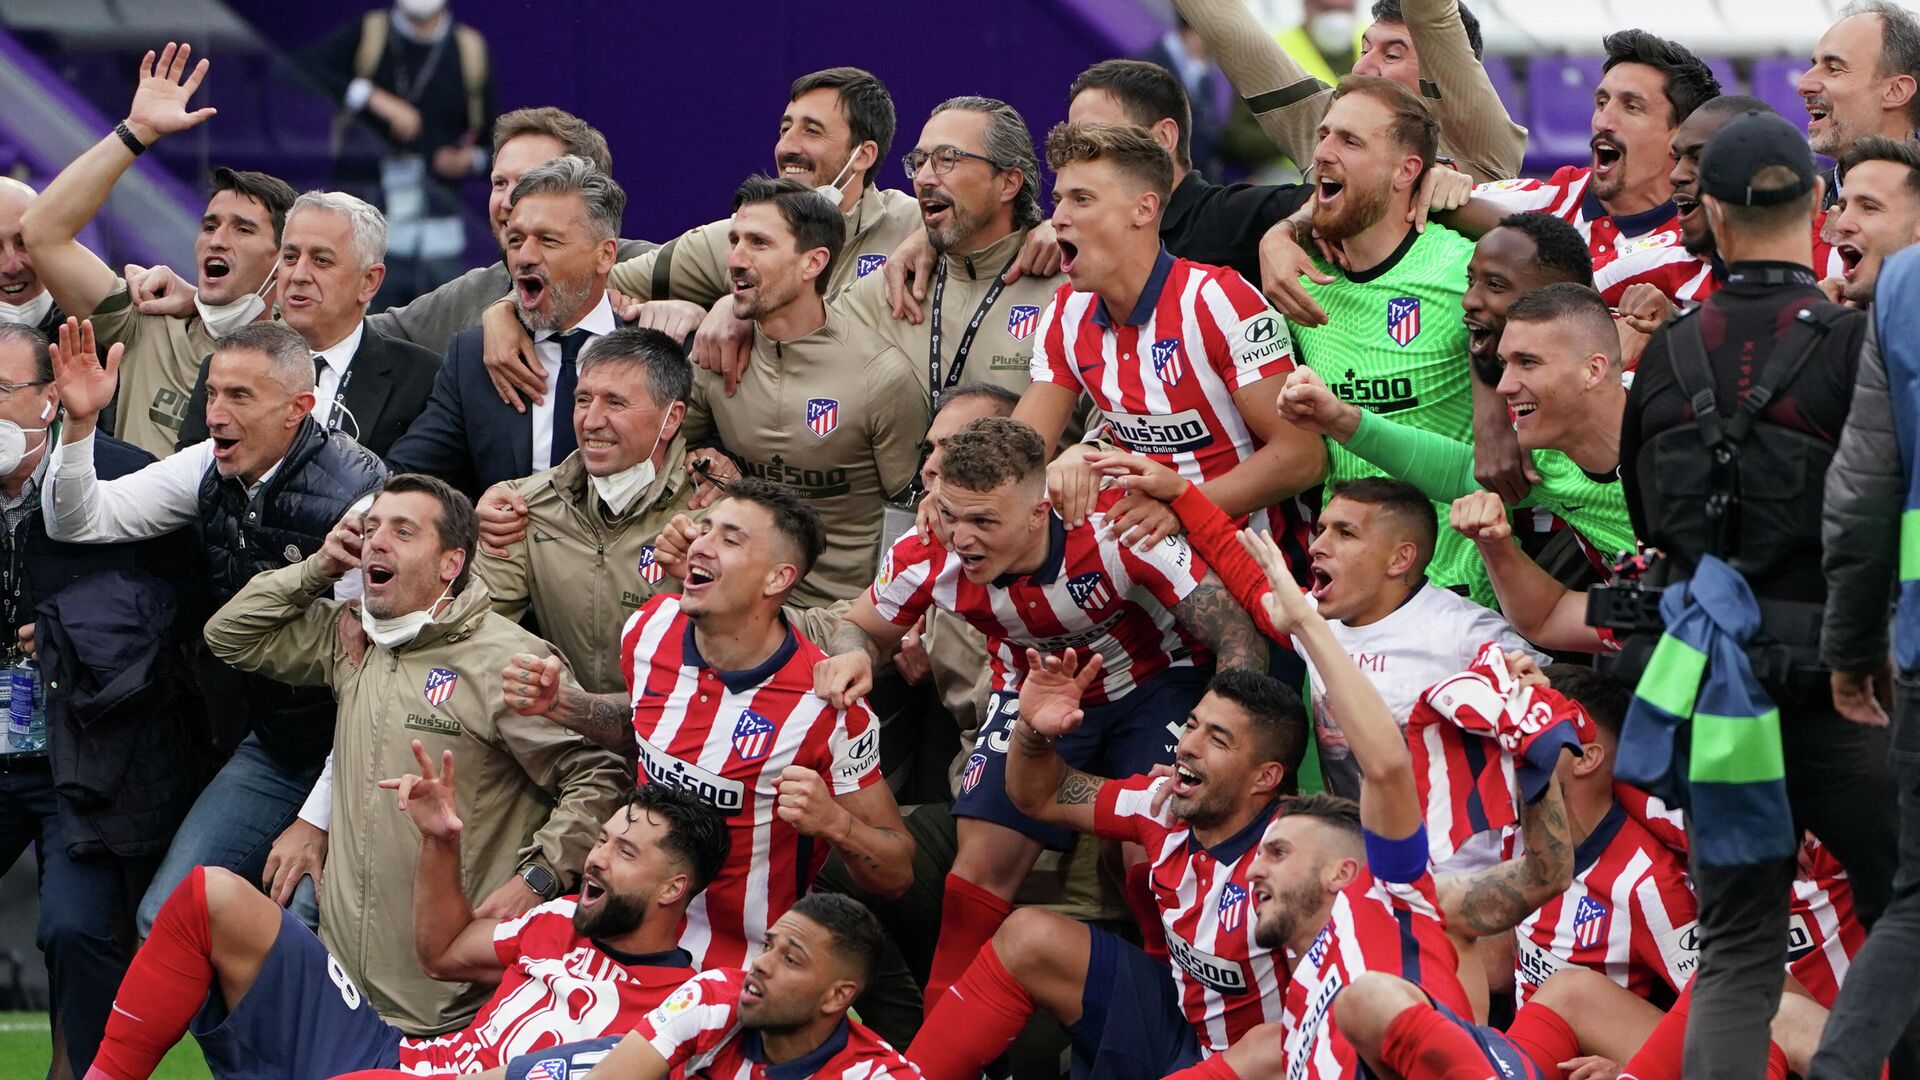 Atletico Madrid's players celebrate after winning the Spanish league football match against Real Valladolid FC and the Liga Championship title at the Jose Zorilla stadium in Valladolid on May 22, 2021. (Photo by CESAR MANSO / AFP) - РИА Новости, 1920, 22.05.2021